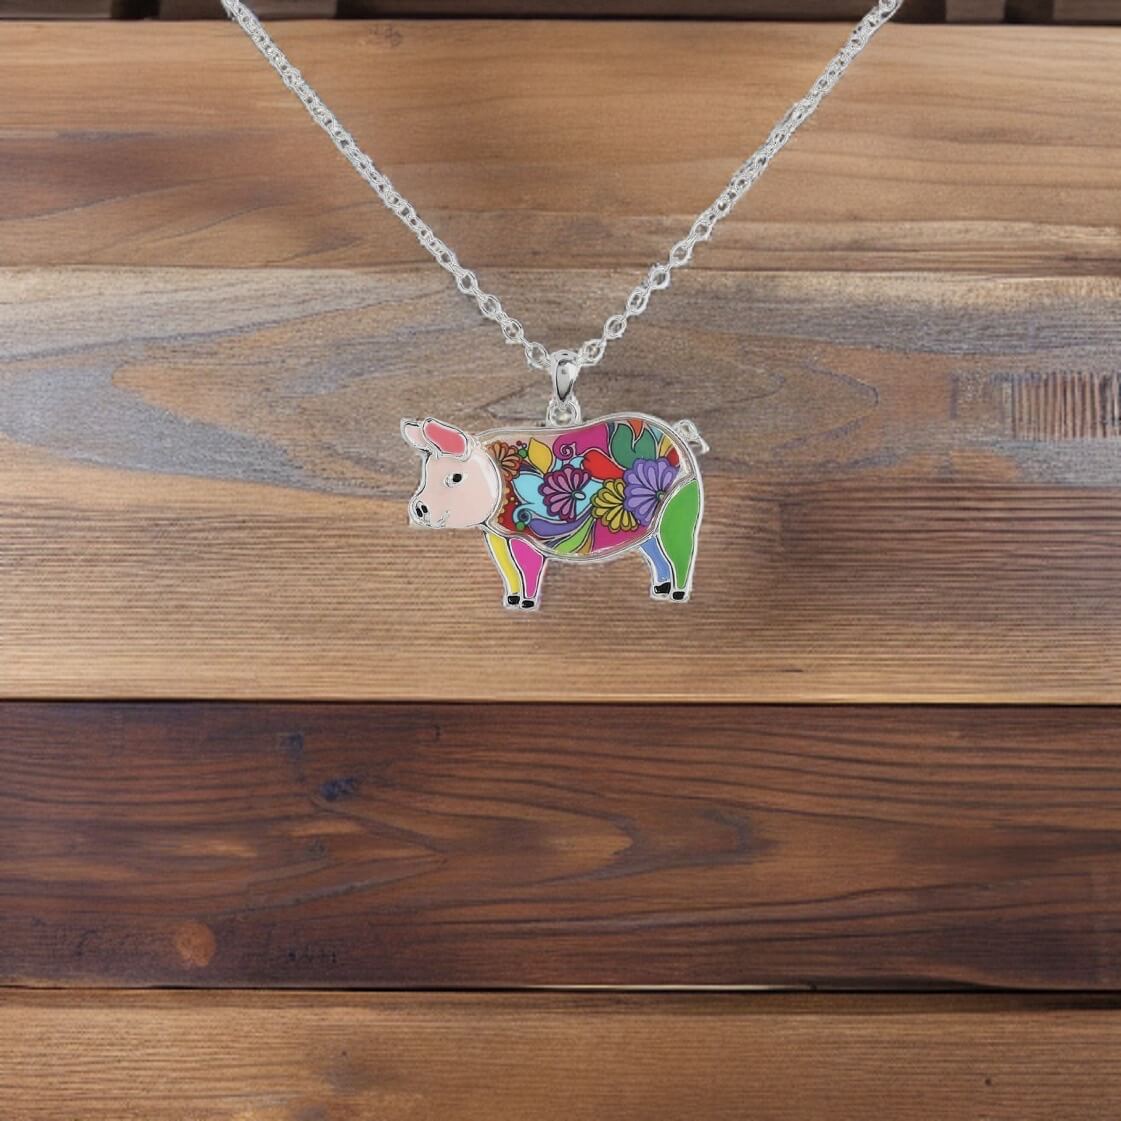 Multi coloured enamel pig necklace with 24" adjustable chain.